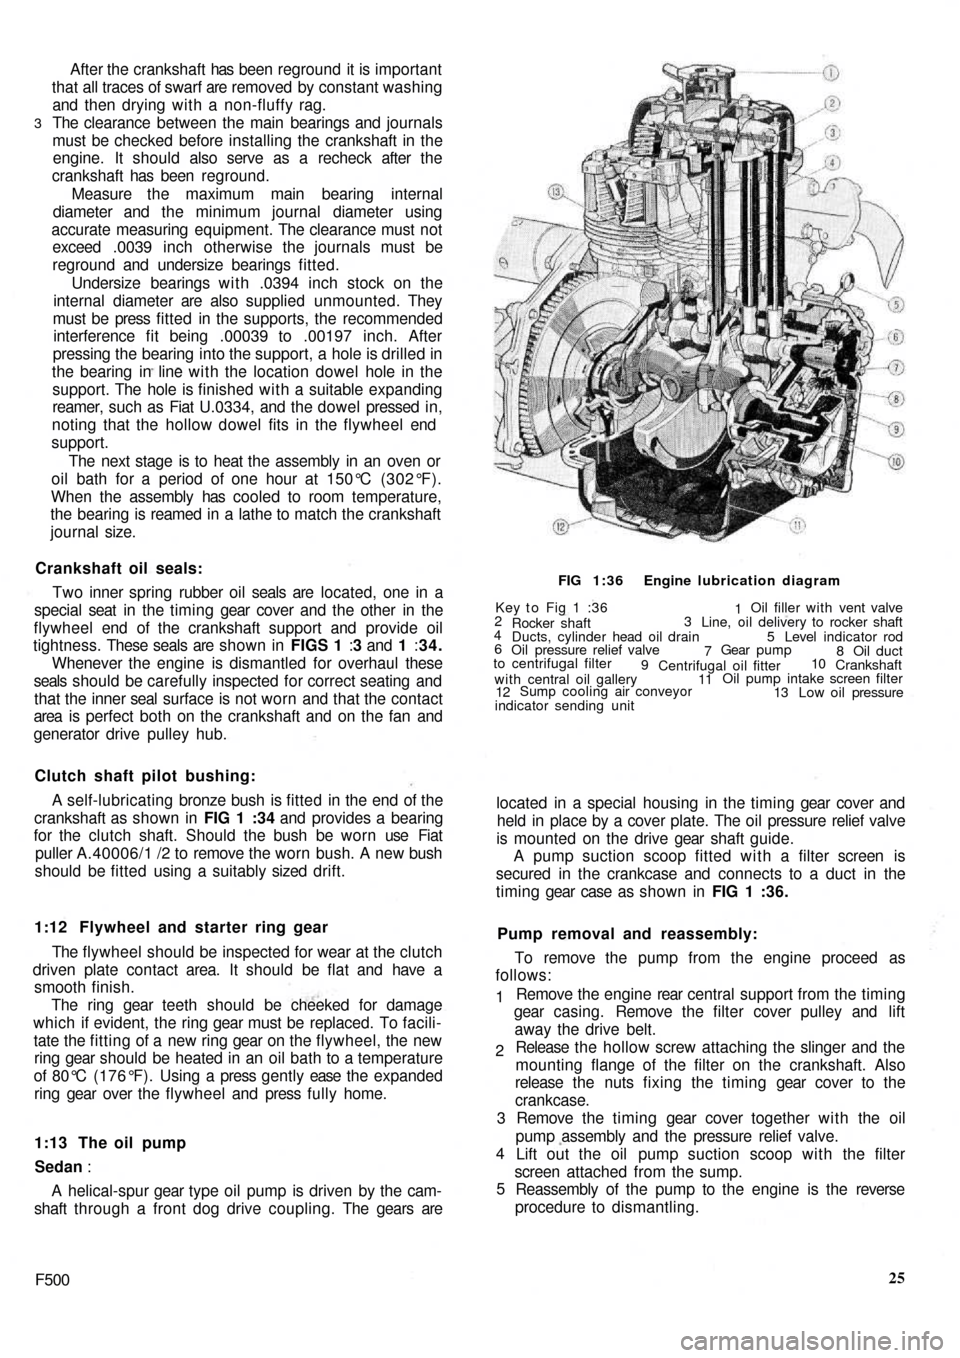 FIAT 500 1960 1.G User Guide After the  crankshaft  has been reground  it is important
that all traces of swarf are removed  by constant washing
and then drying with a non-fluffy rag.
The clearance between the main bearings and j